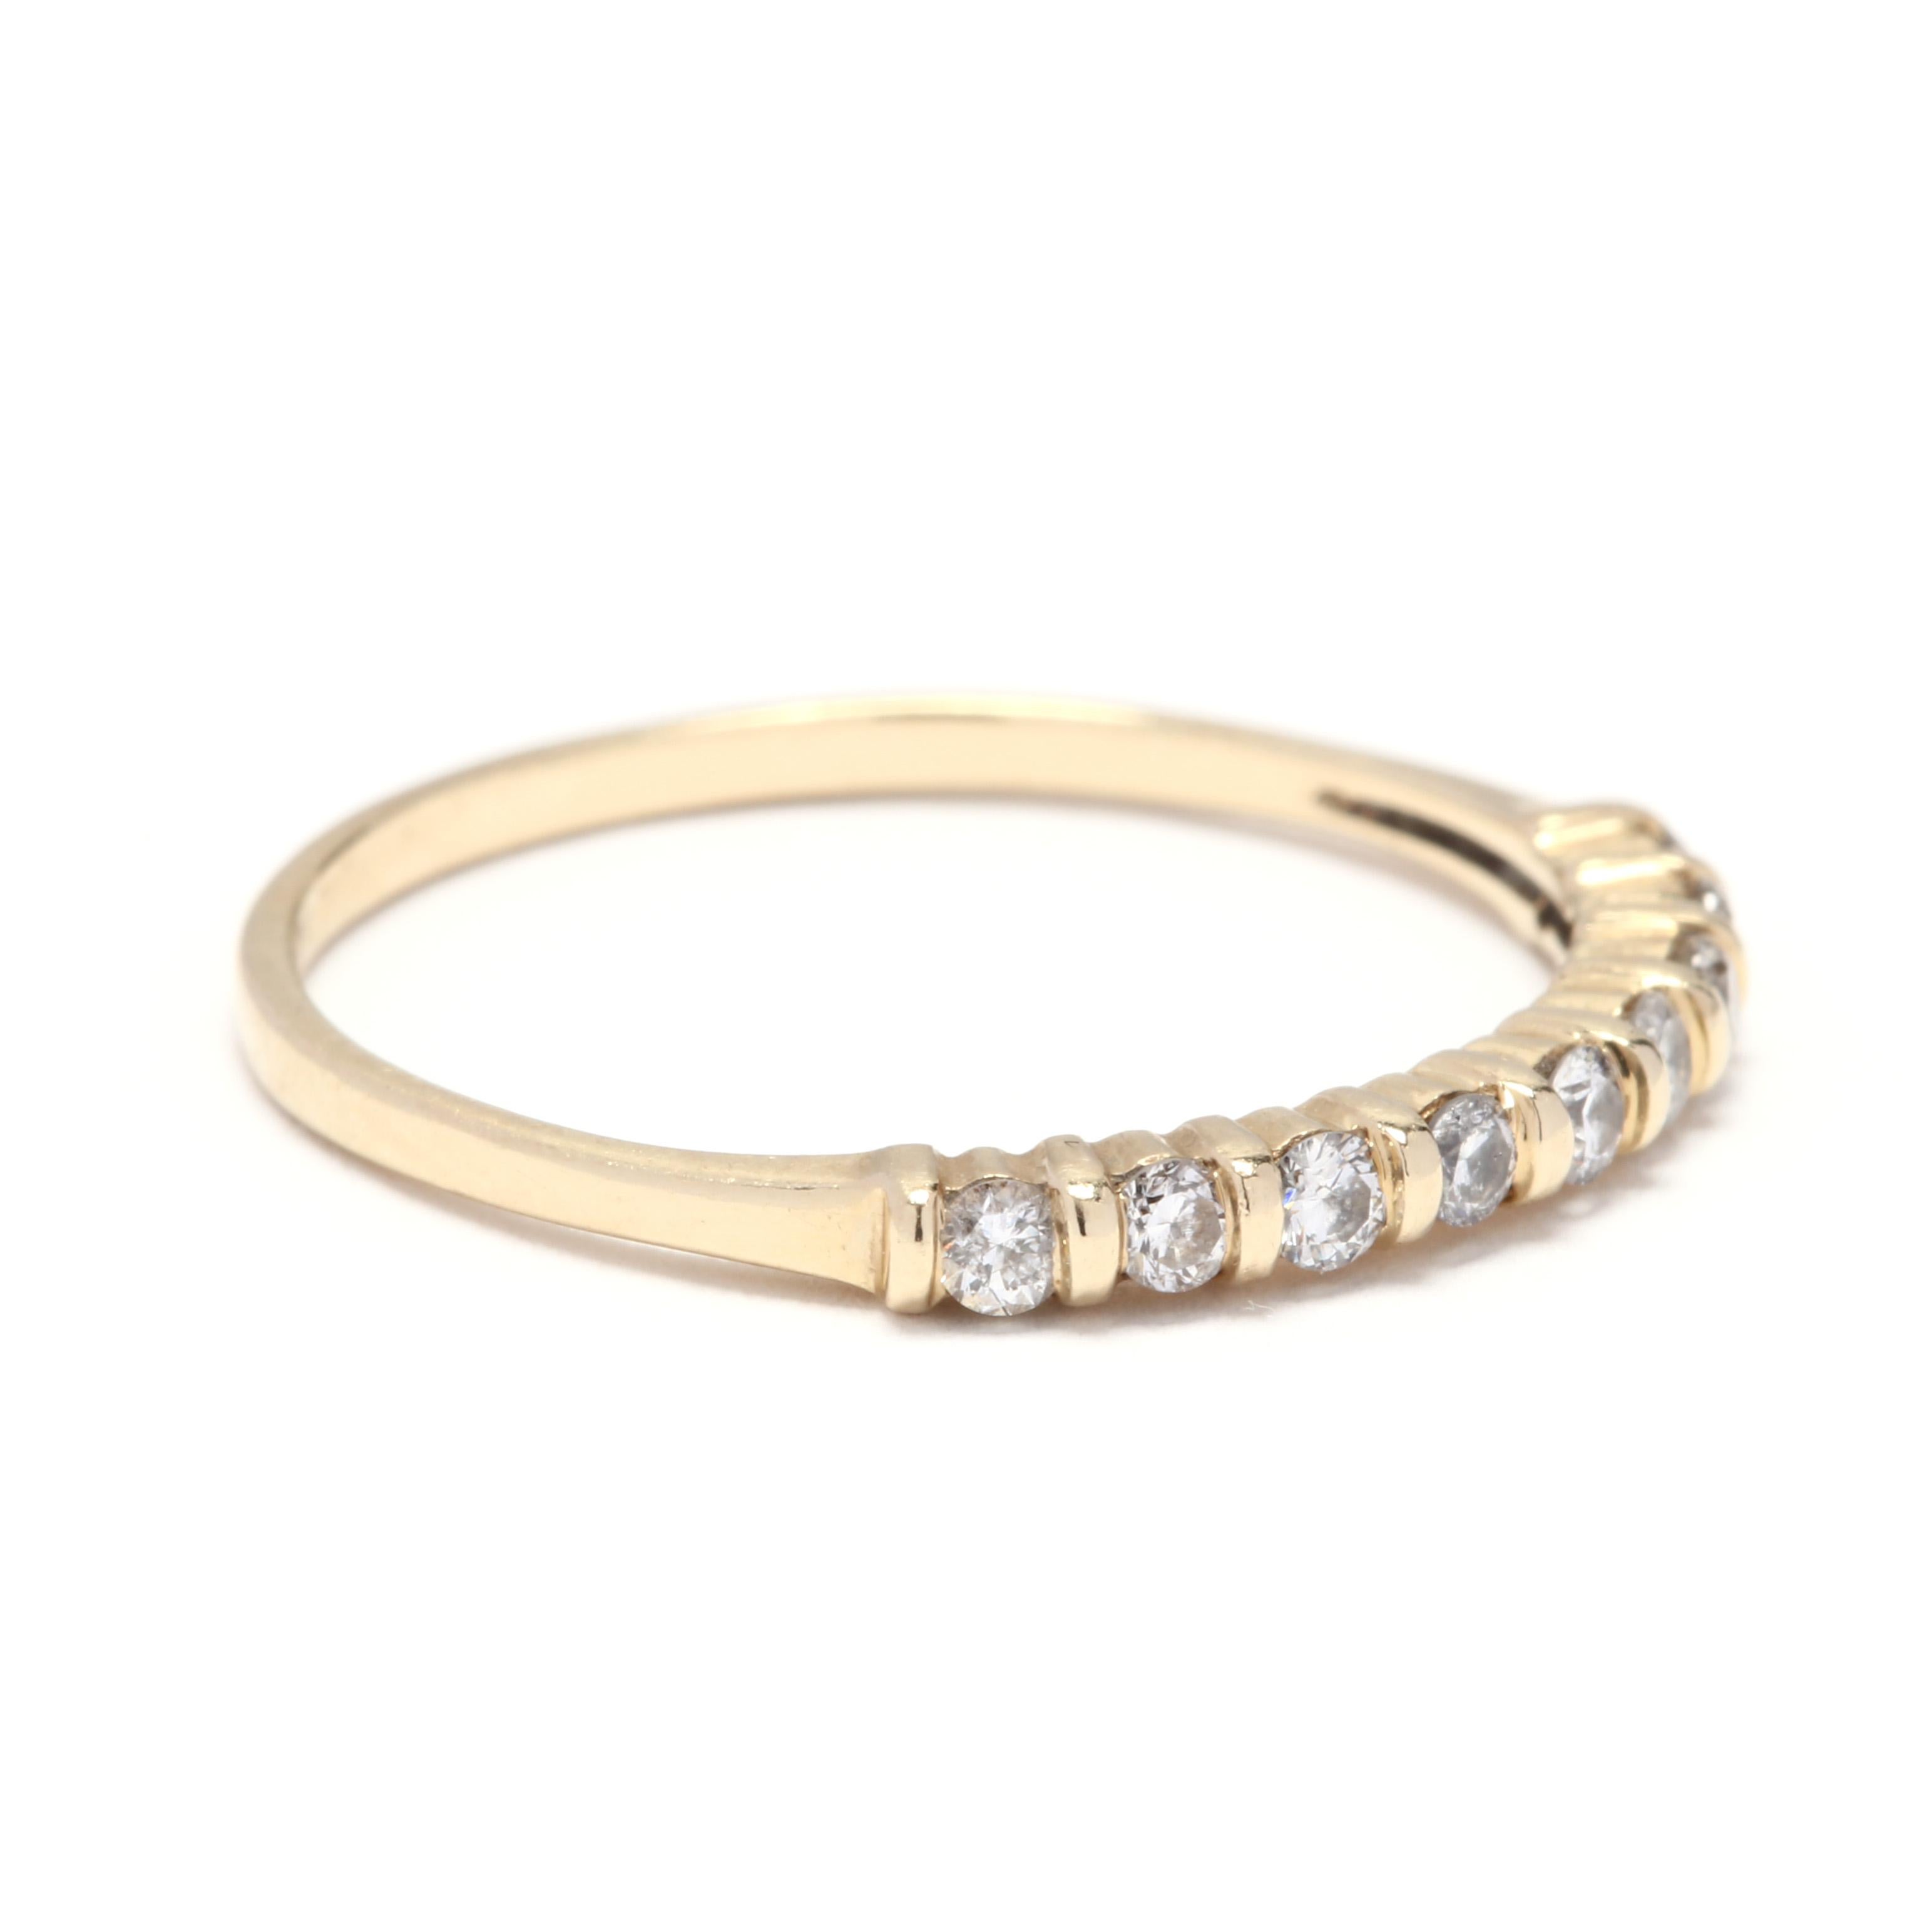 A 14 karat yellow gold and bar set diamond stackable wedding band ring. This ring features a thin design with bar set, full cut round diamonds weighing approximately .40 total carats.

Stones:
- diamonds, 13 stones
- full cut round
- 2 mm
-